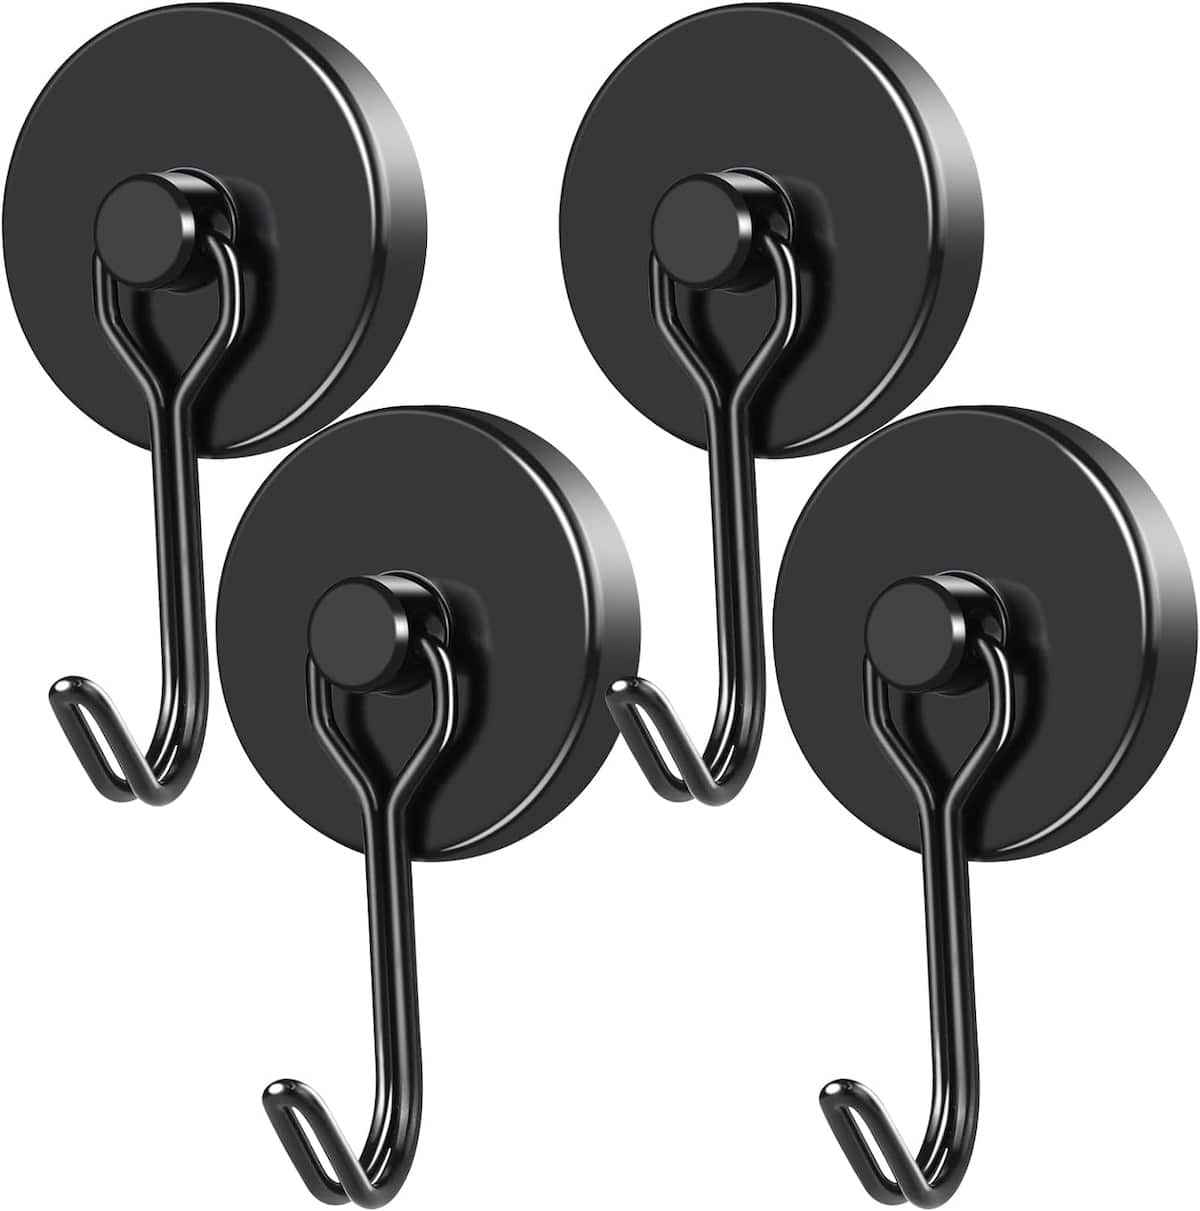 Four black, round wall hooks with a metallic finish, mounted on an invisible surface, each featuring a simple, curved hook design.